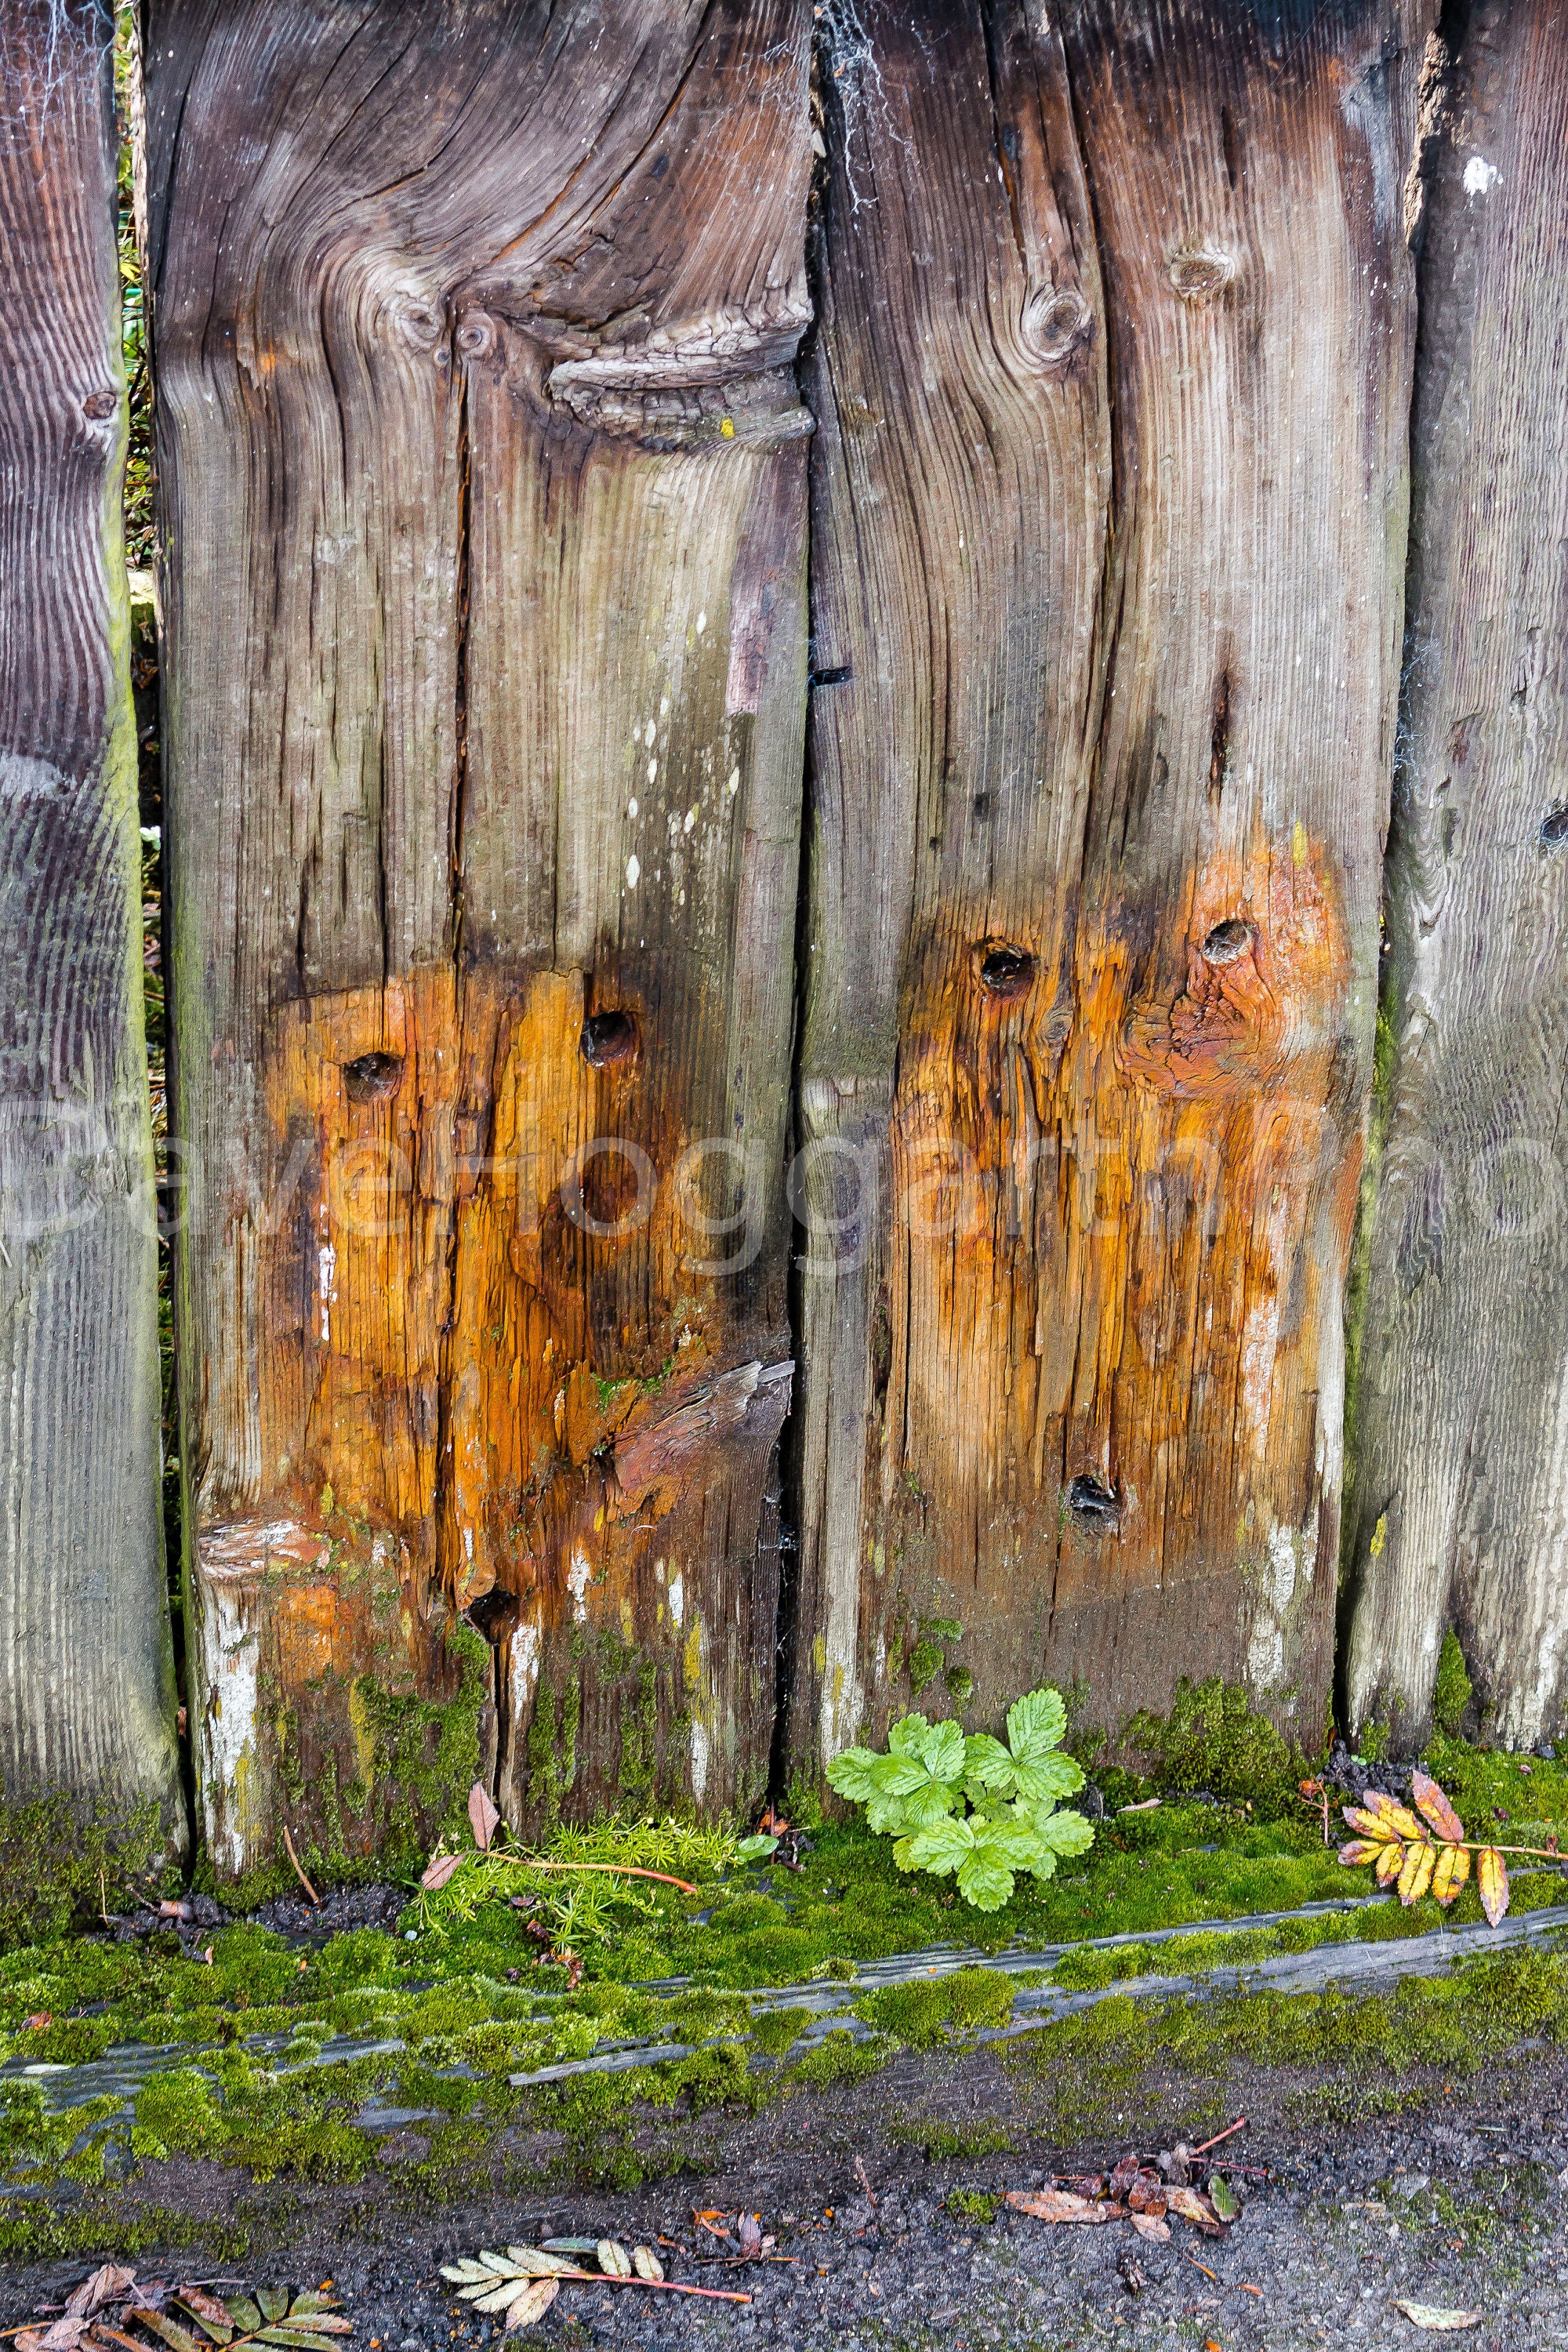 Two Owls on a Fence  - North Yorkshire - England - Instant Download - Digital Download - Printable D